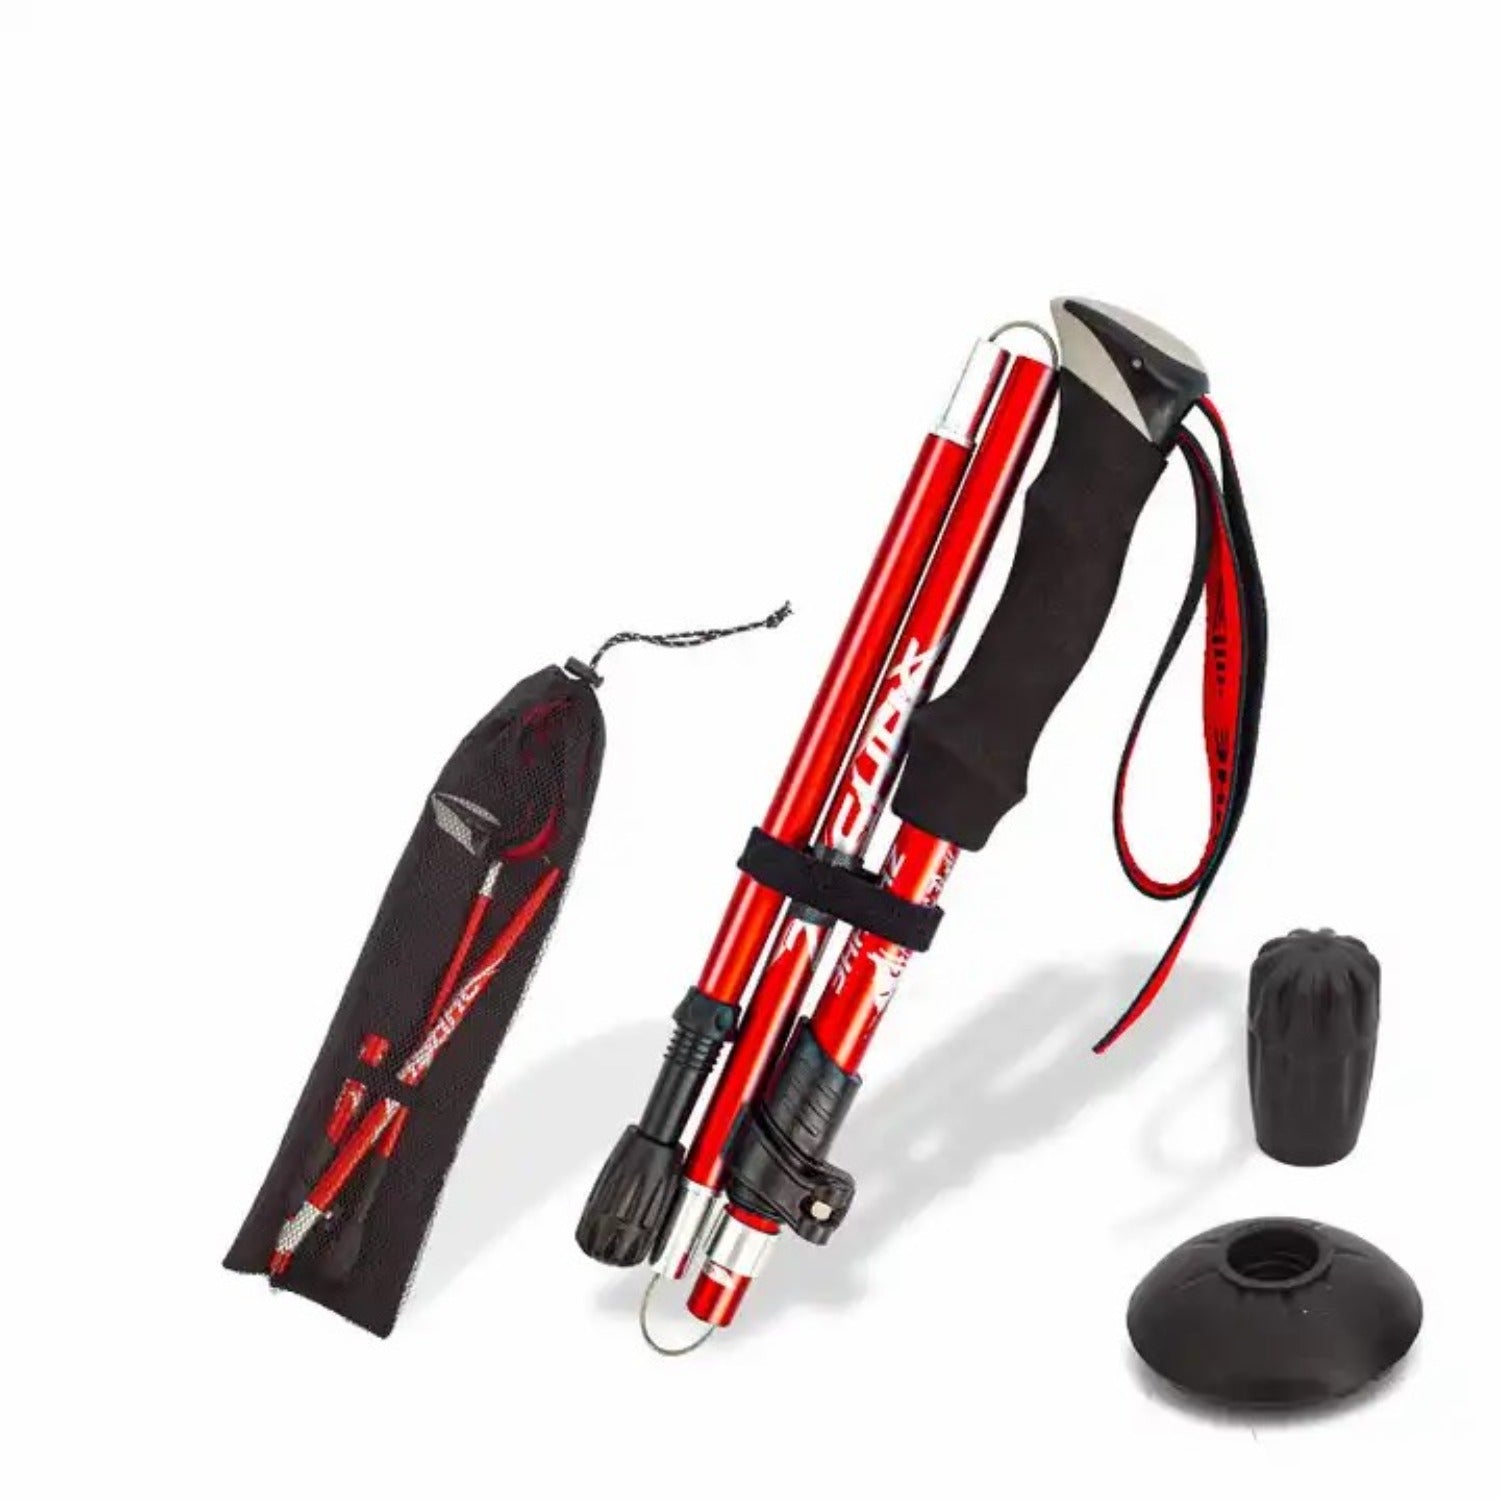 Buy K2 Foldable Trekking Pole 33 Cms Red at Gokyo Outdoor Clothing & Gear